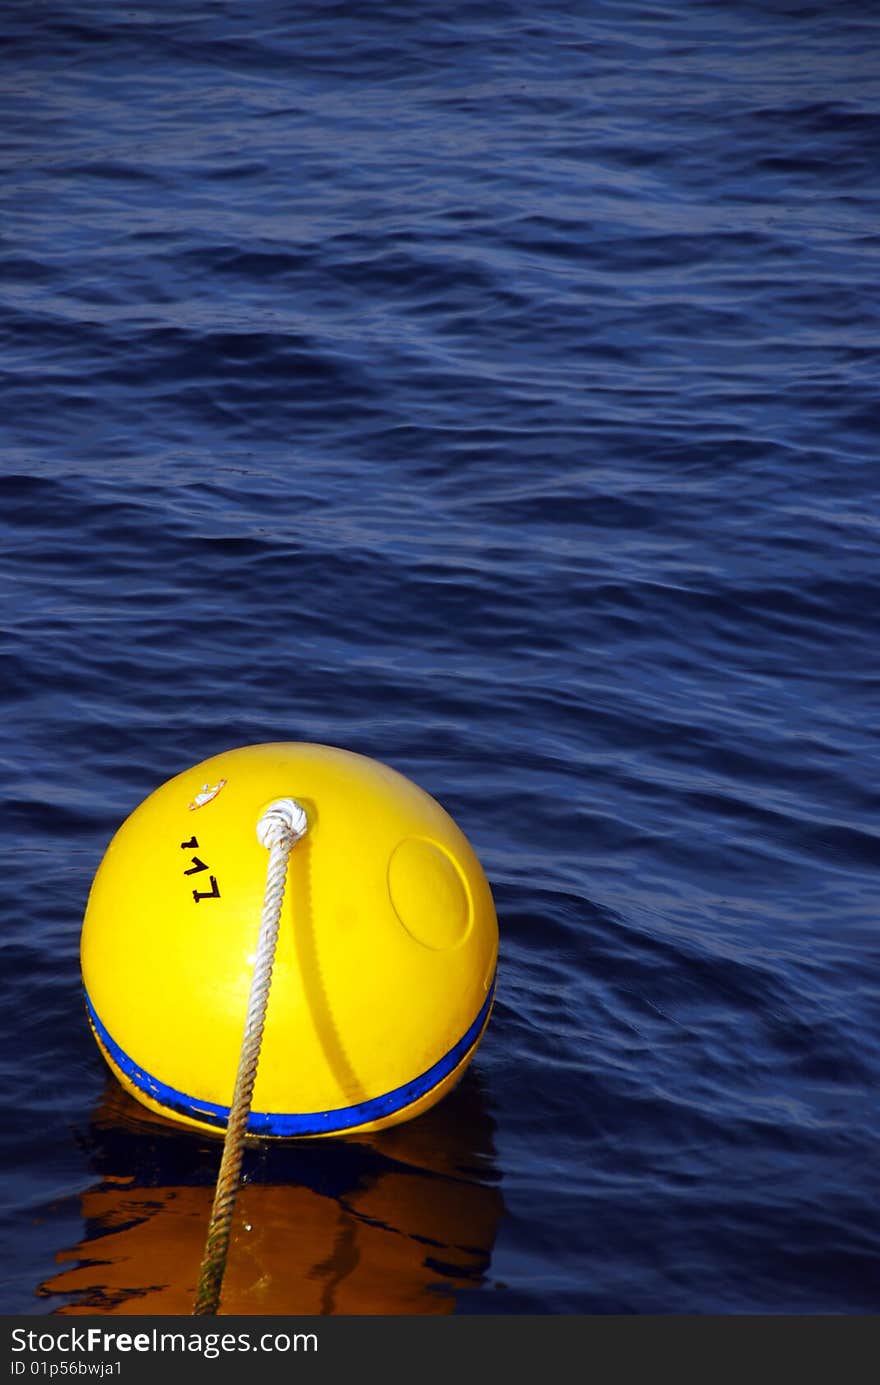 A striking yellow buoy in the waters around the Similans, South-East Asia